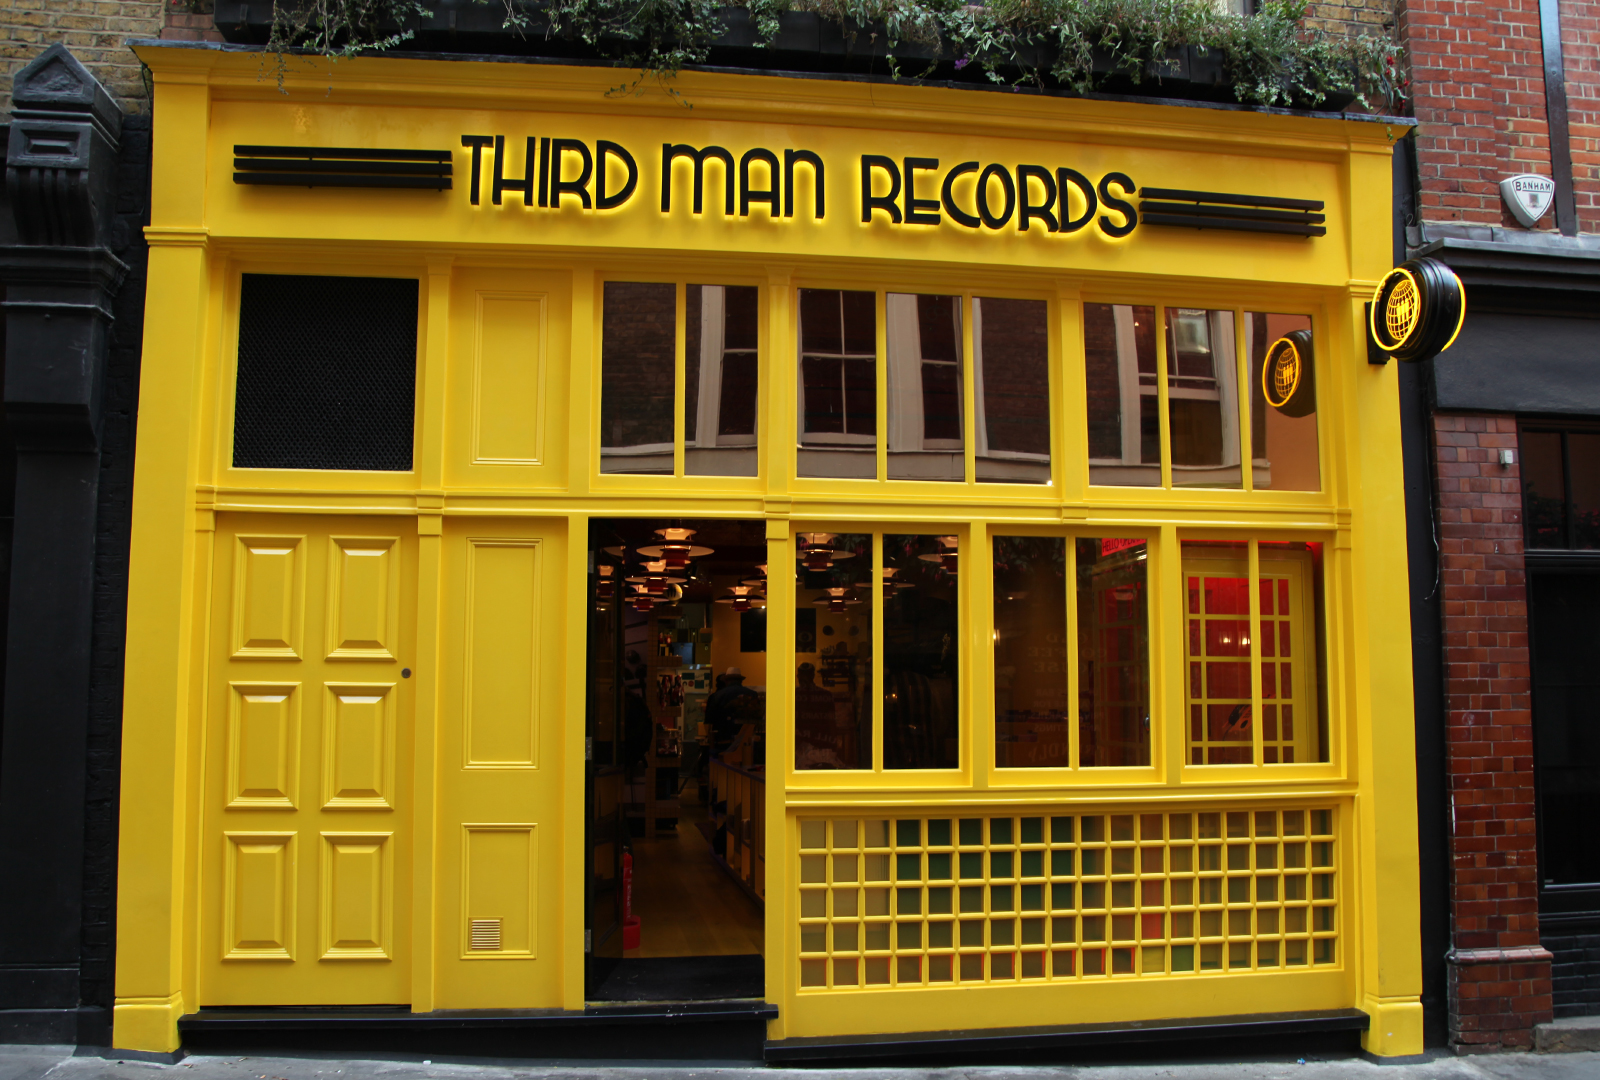 Inside White's new London record Records